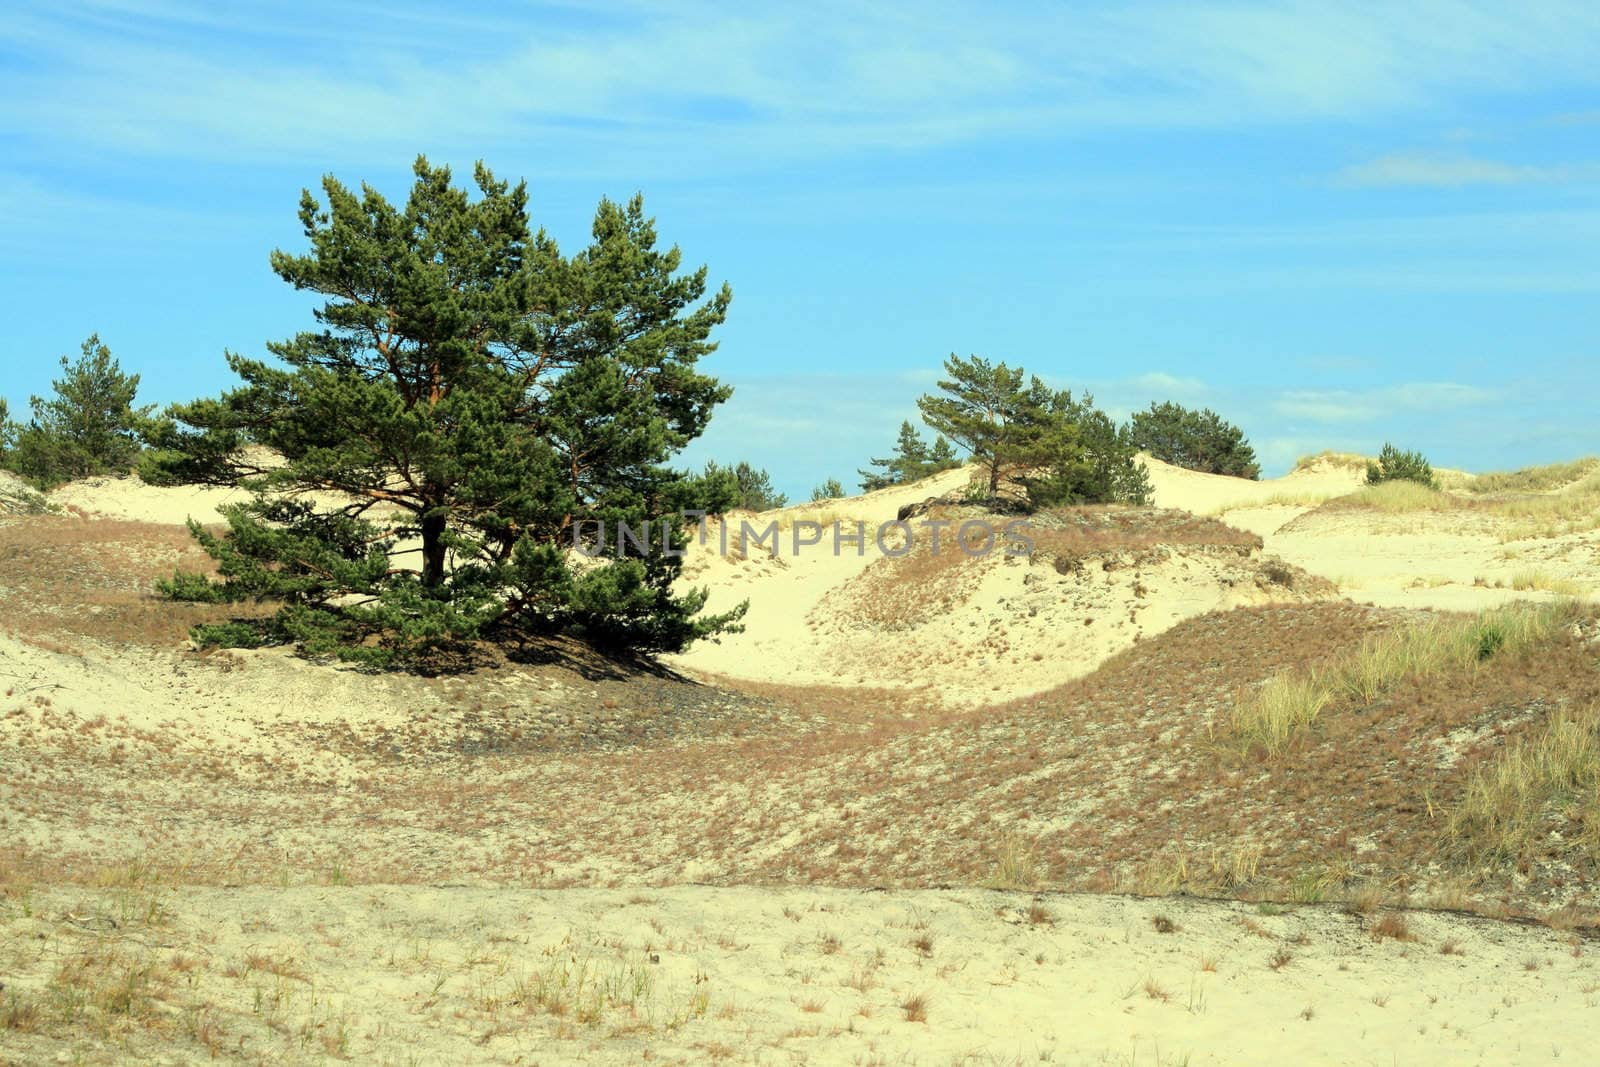 Sand dunes and forests at Leba - Poland
